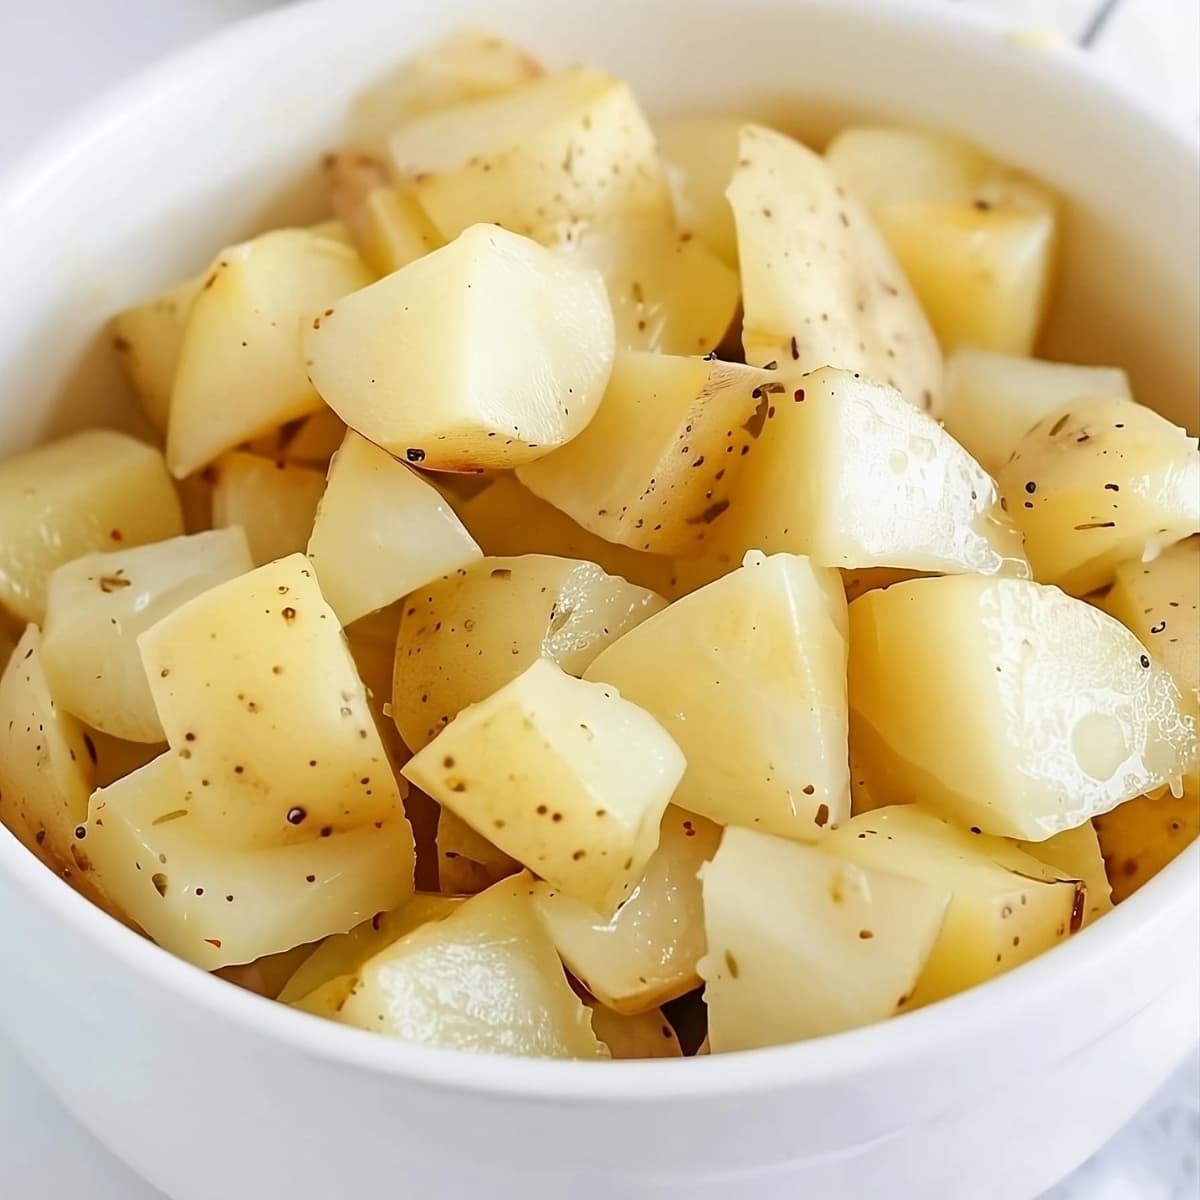 Baked potatoes sliced in cubes served in a white bowl.